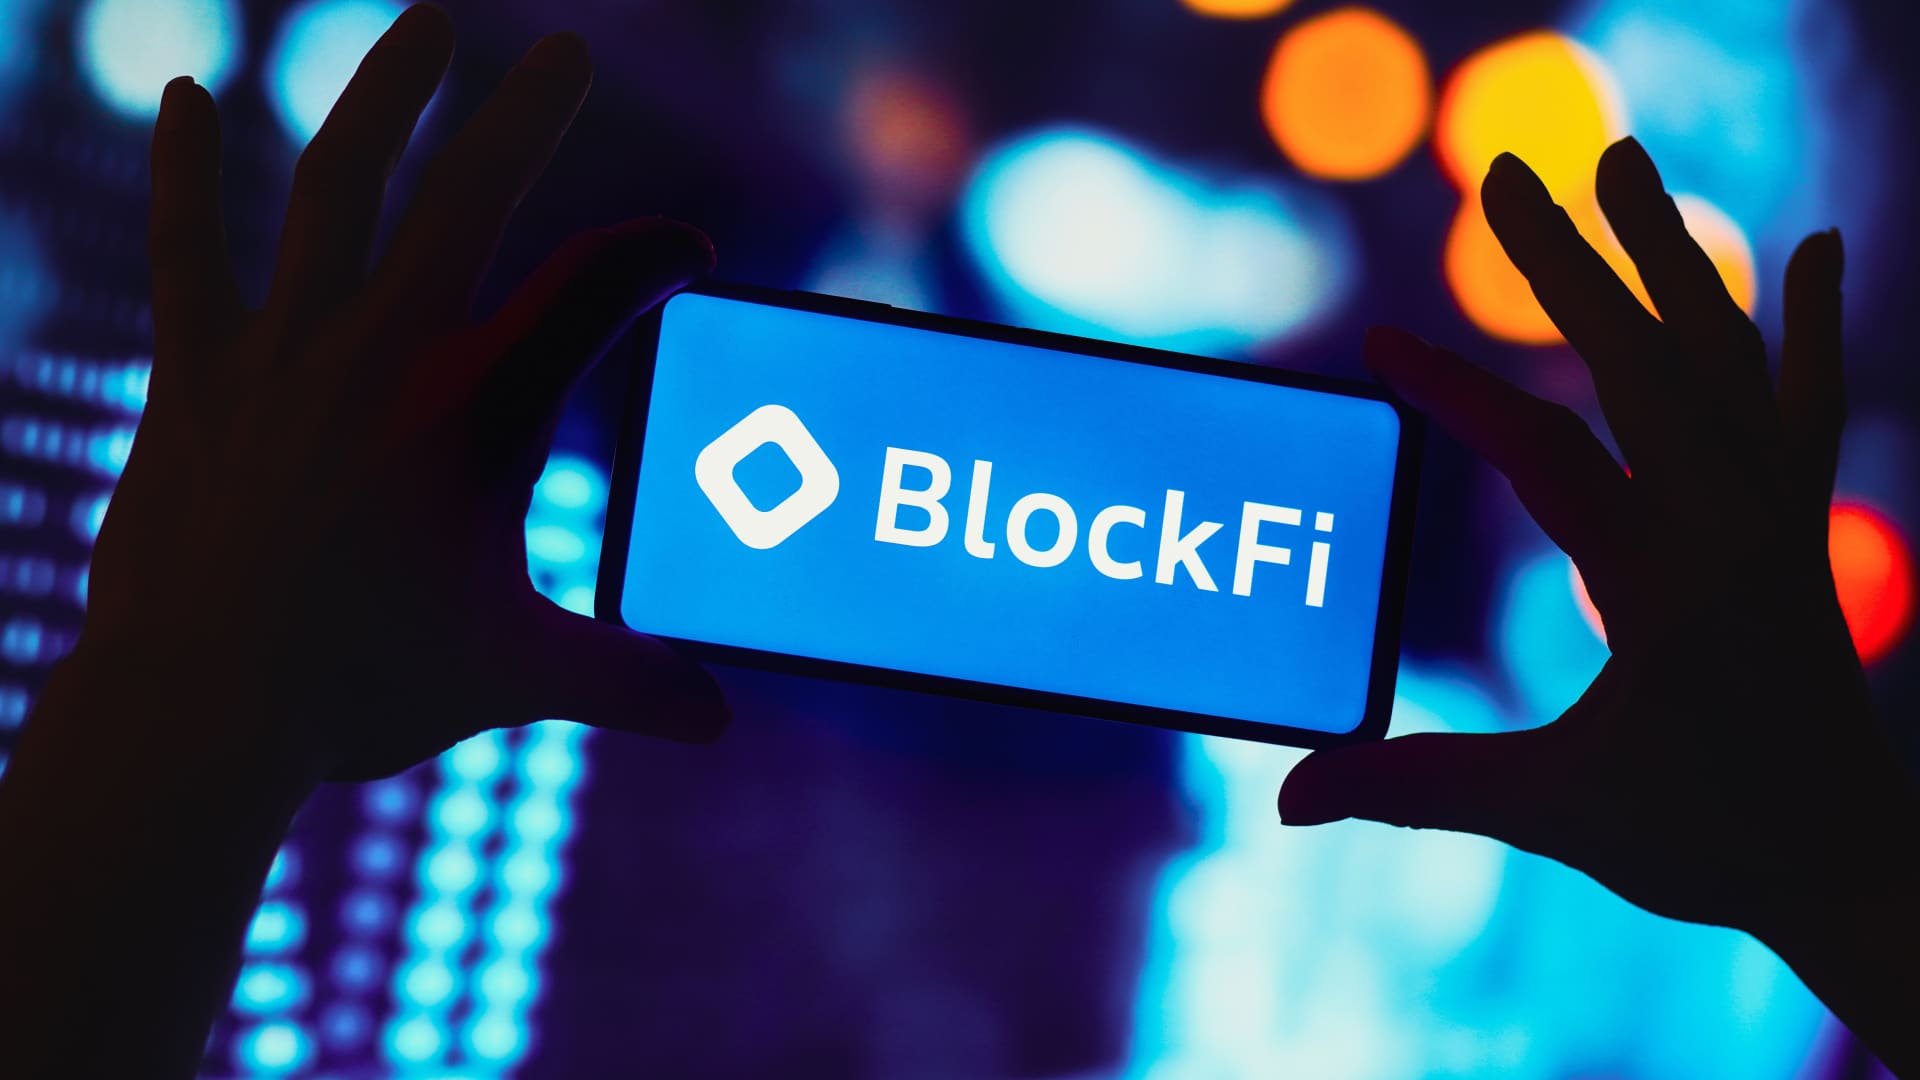 BlockFi lawyer tells court priority is to ‘maximize client recoveries’